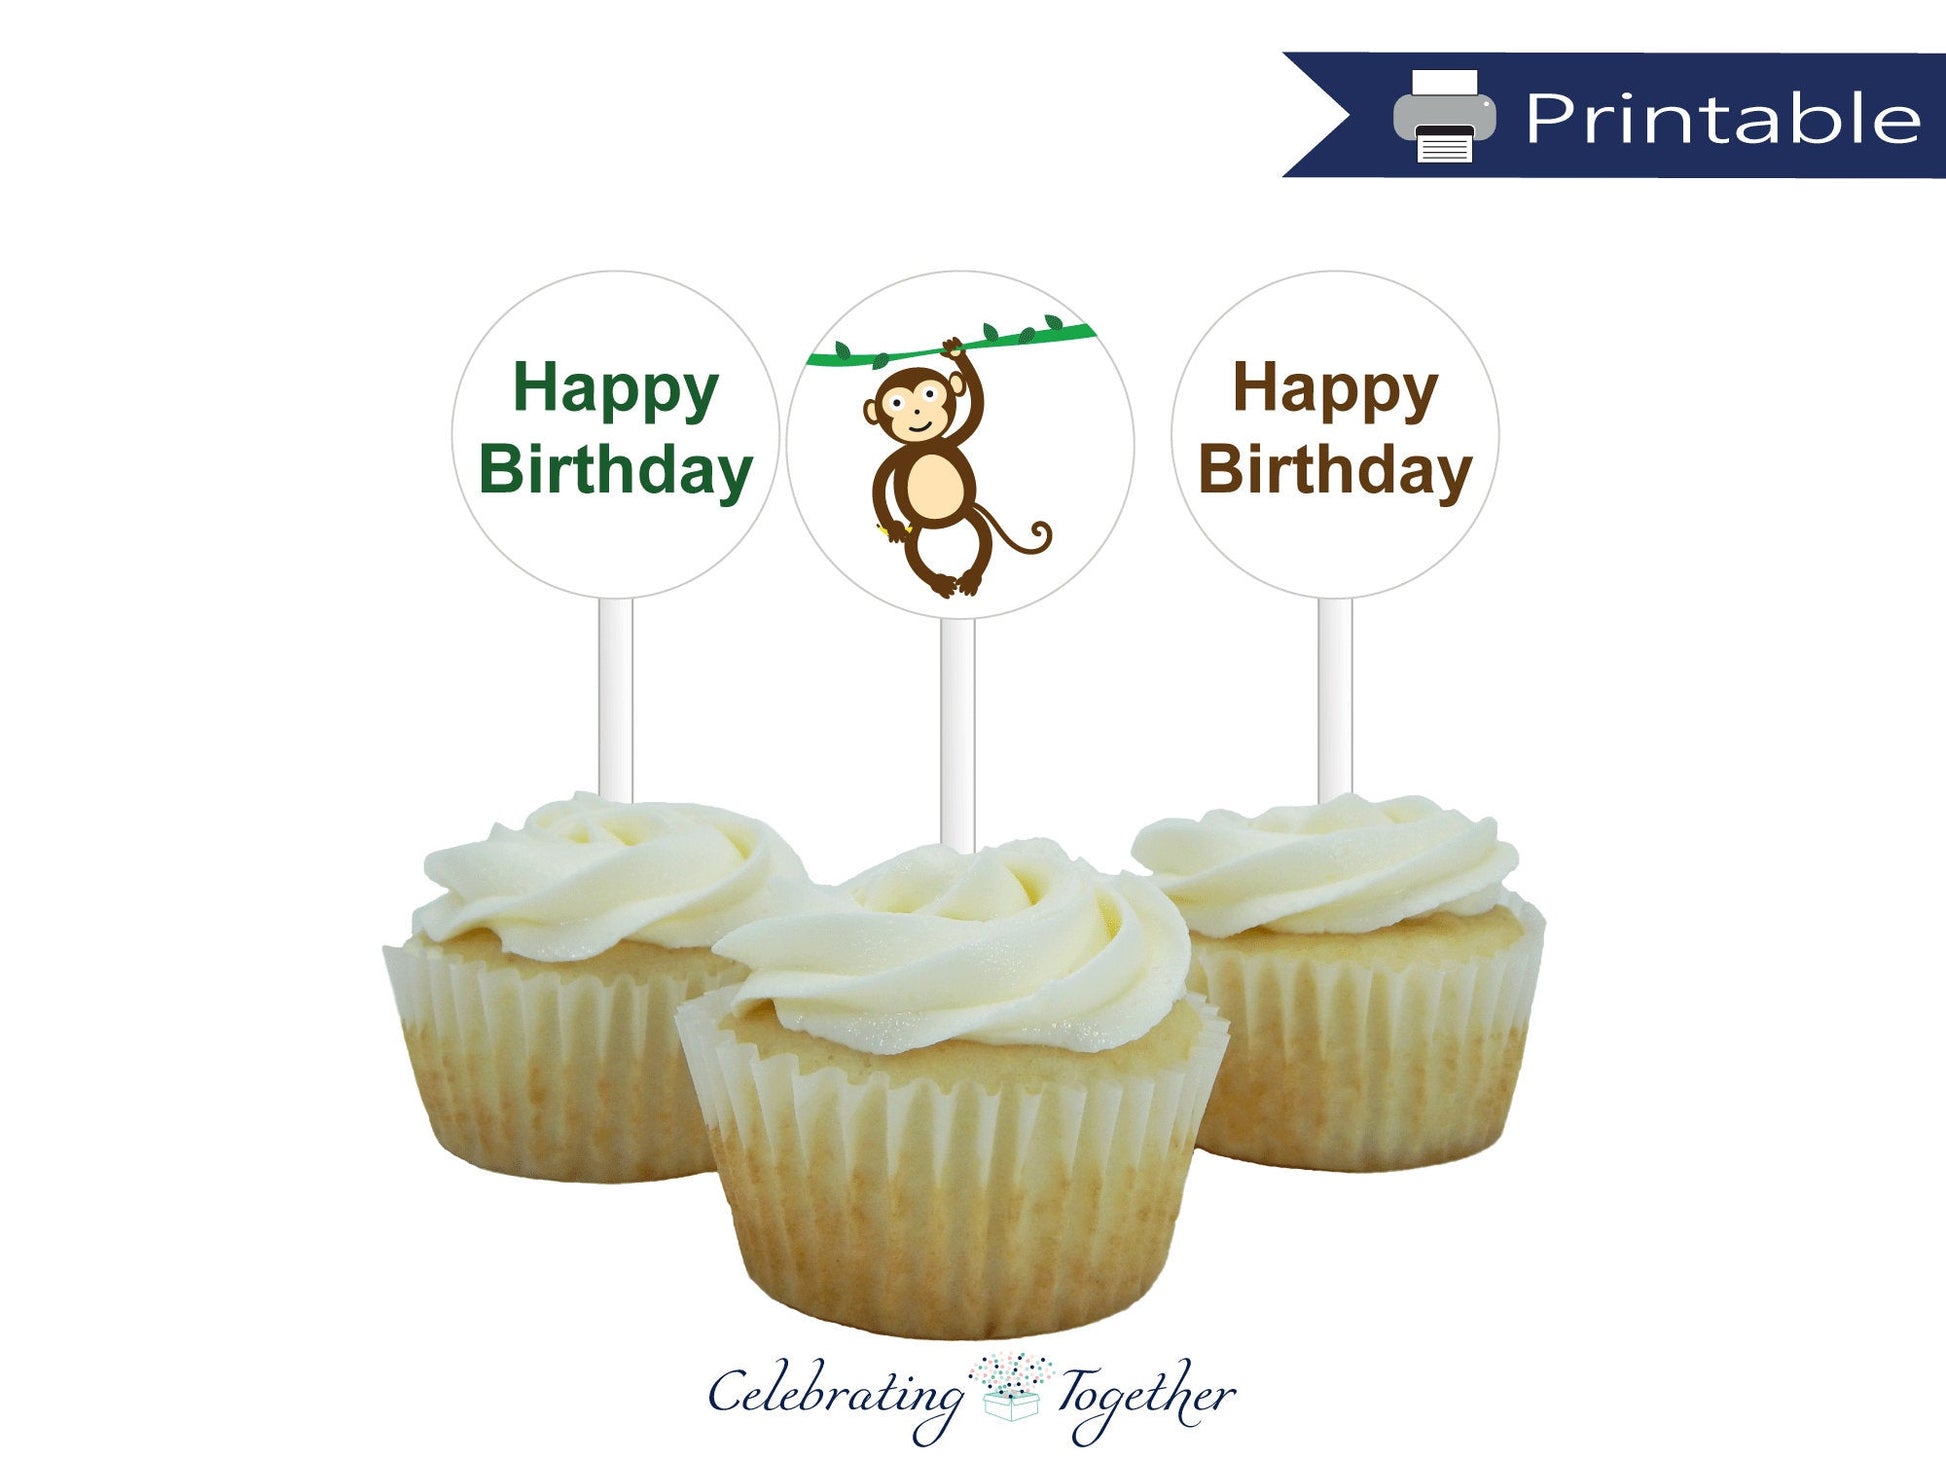 printable monkey birthday cupcake toppers - Celebrating Together